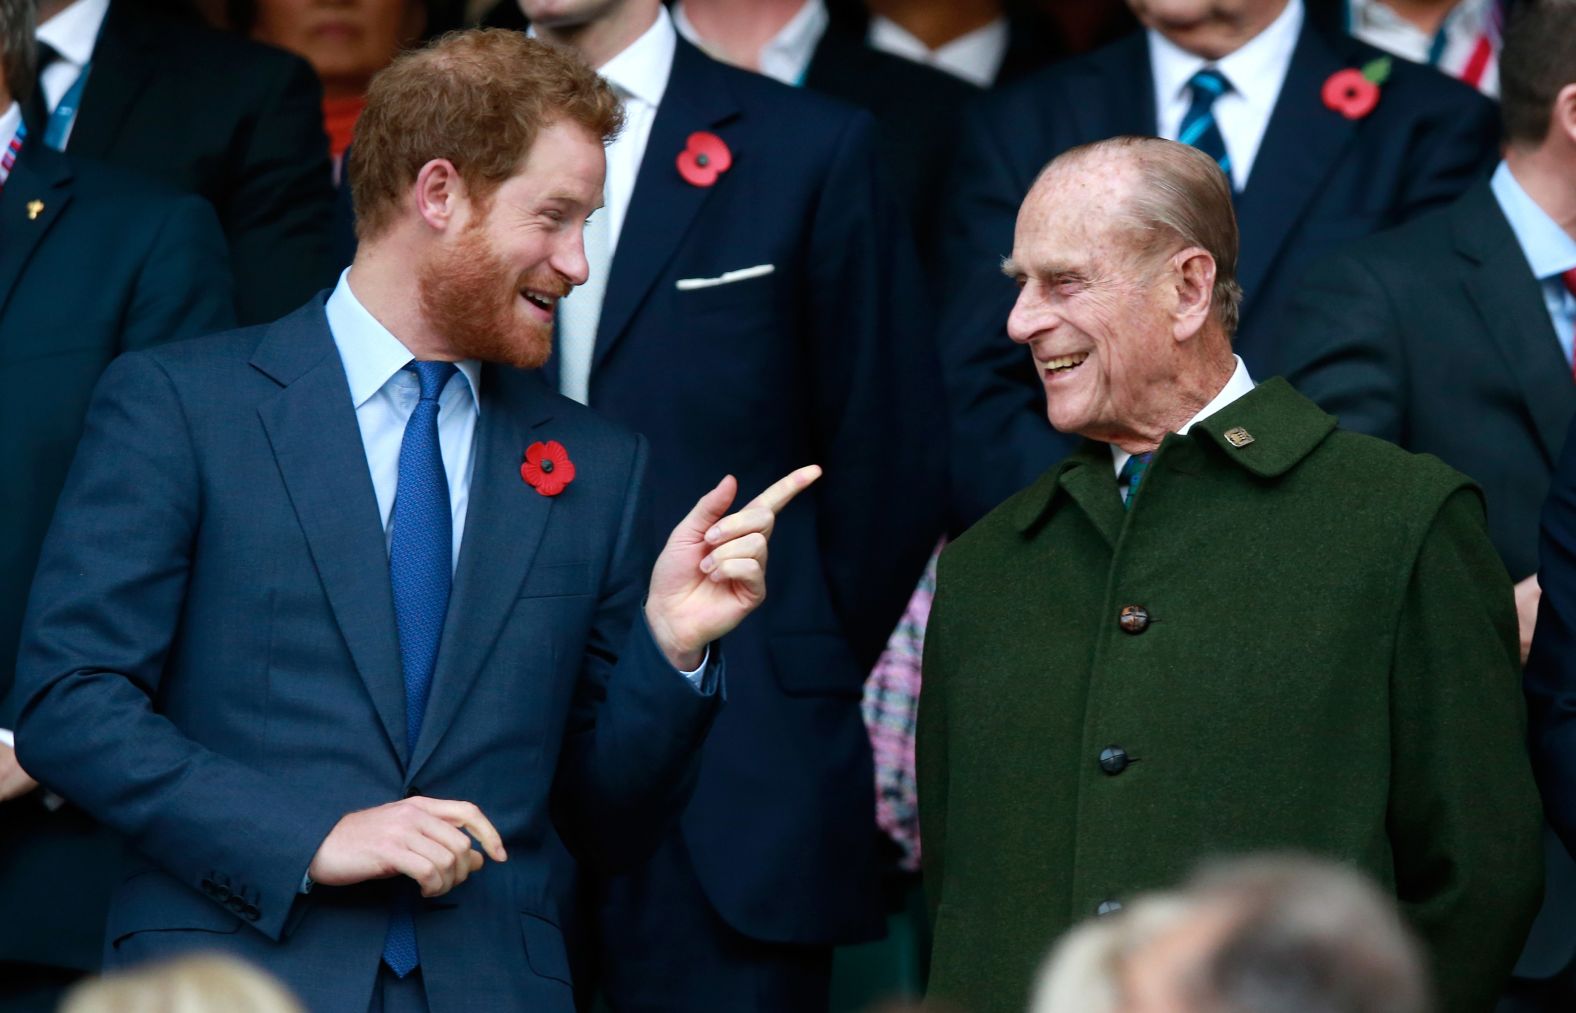 Prince Phillip and his grandson Prince Harry attend the Rugby World Cup final in October 2015.